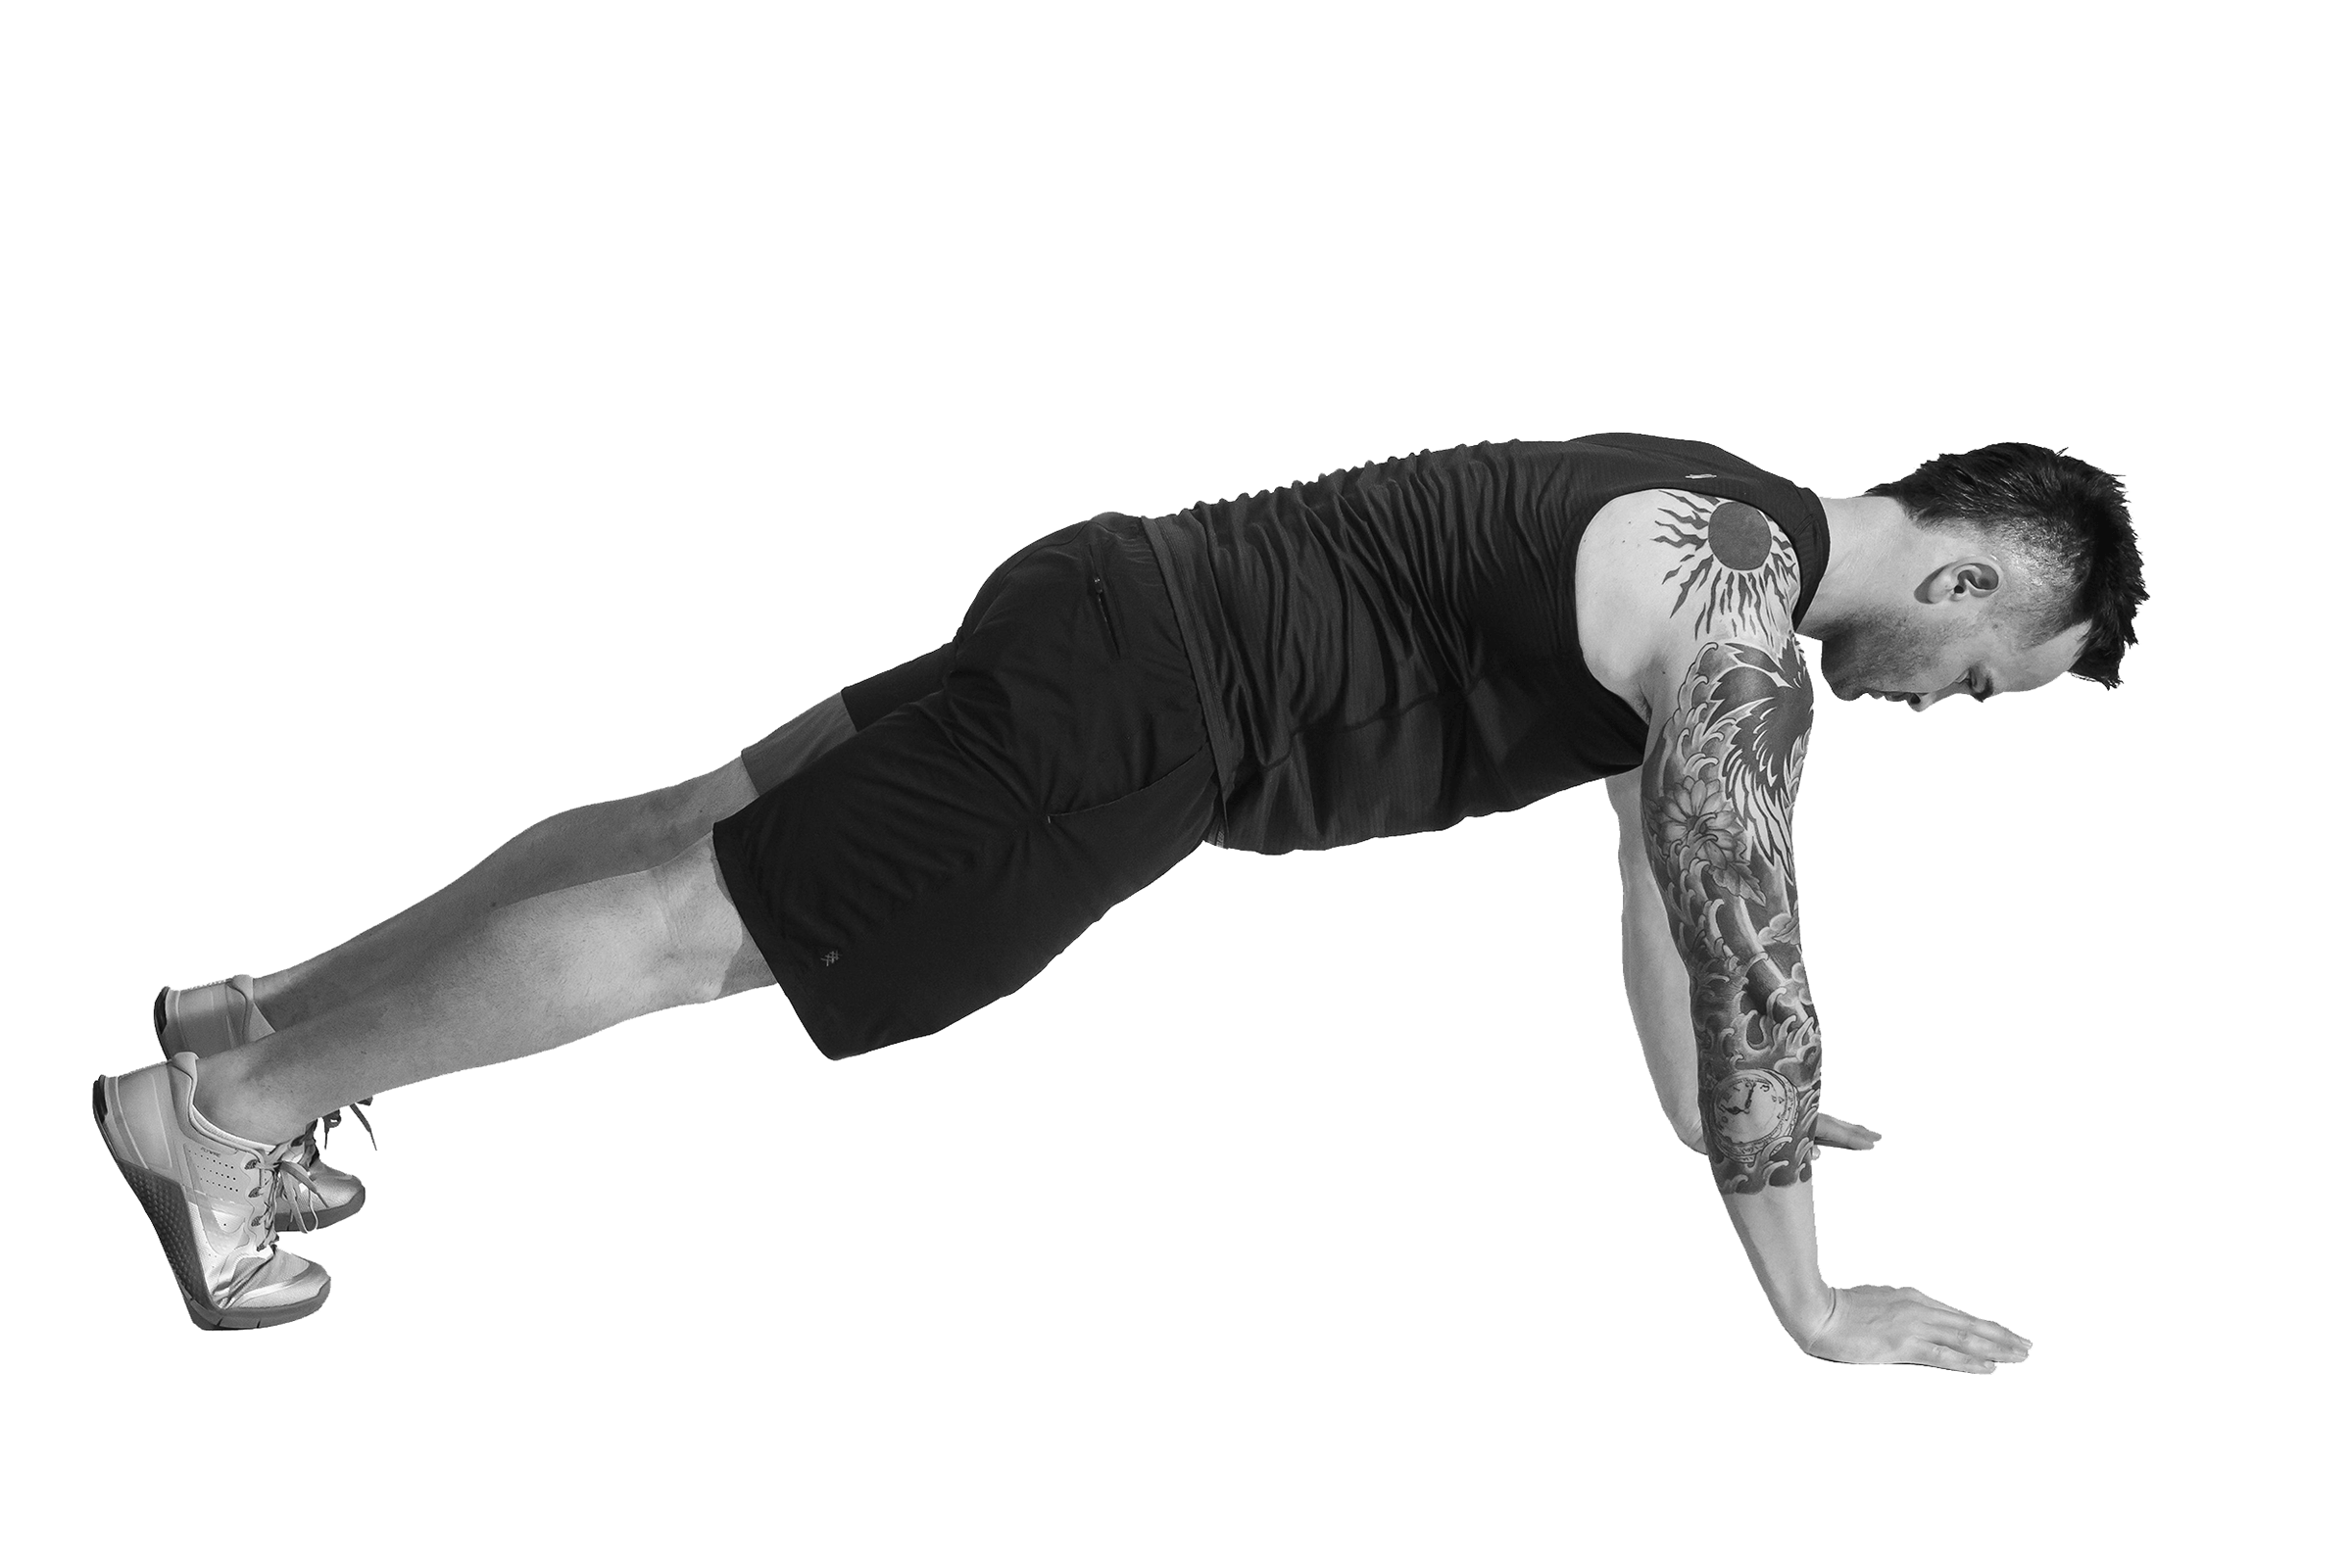 02-plank-walkup-plank-exercises-subtly-transform-abs